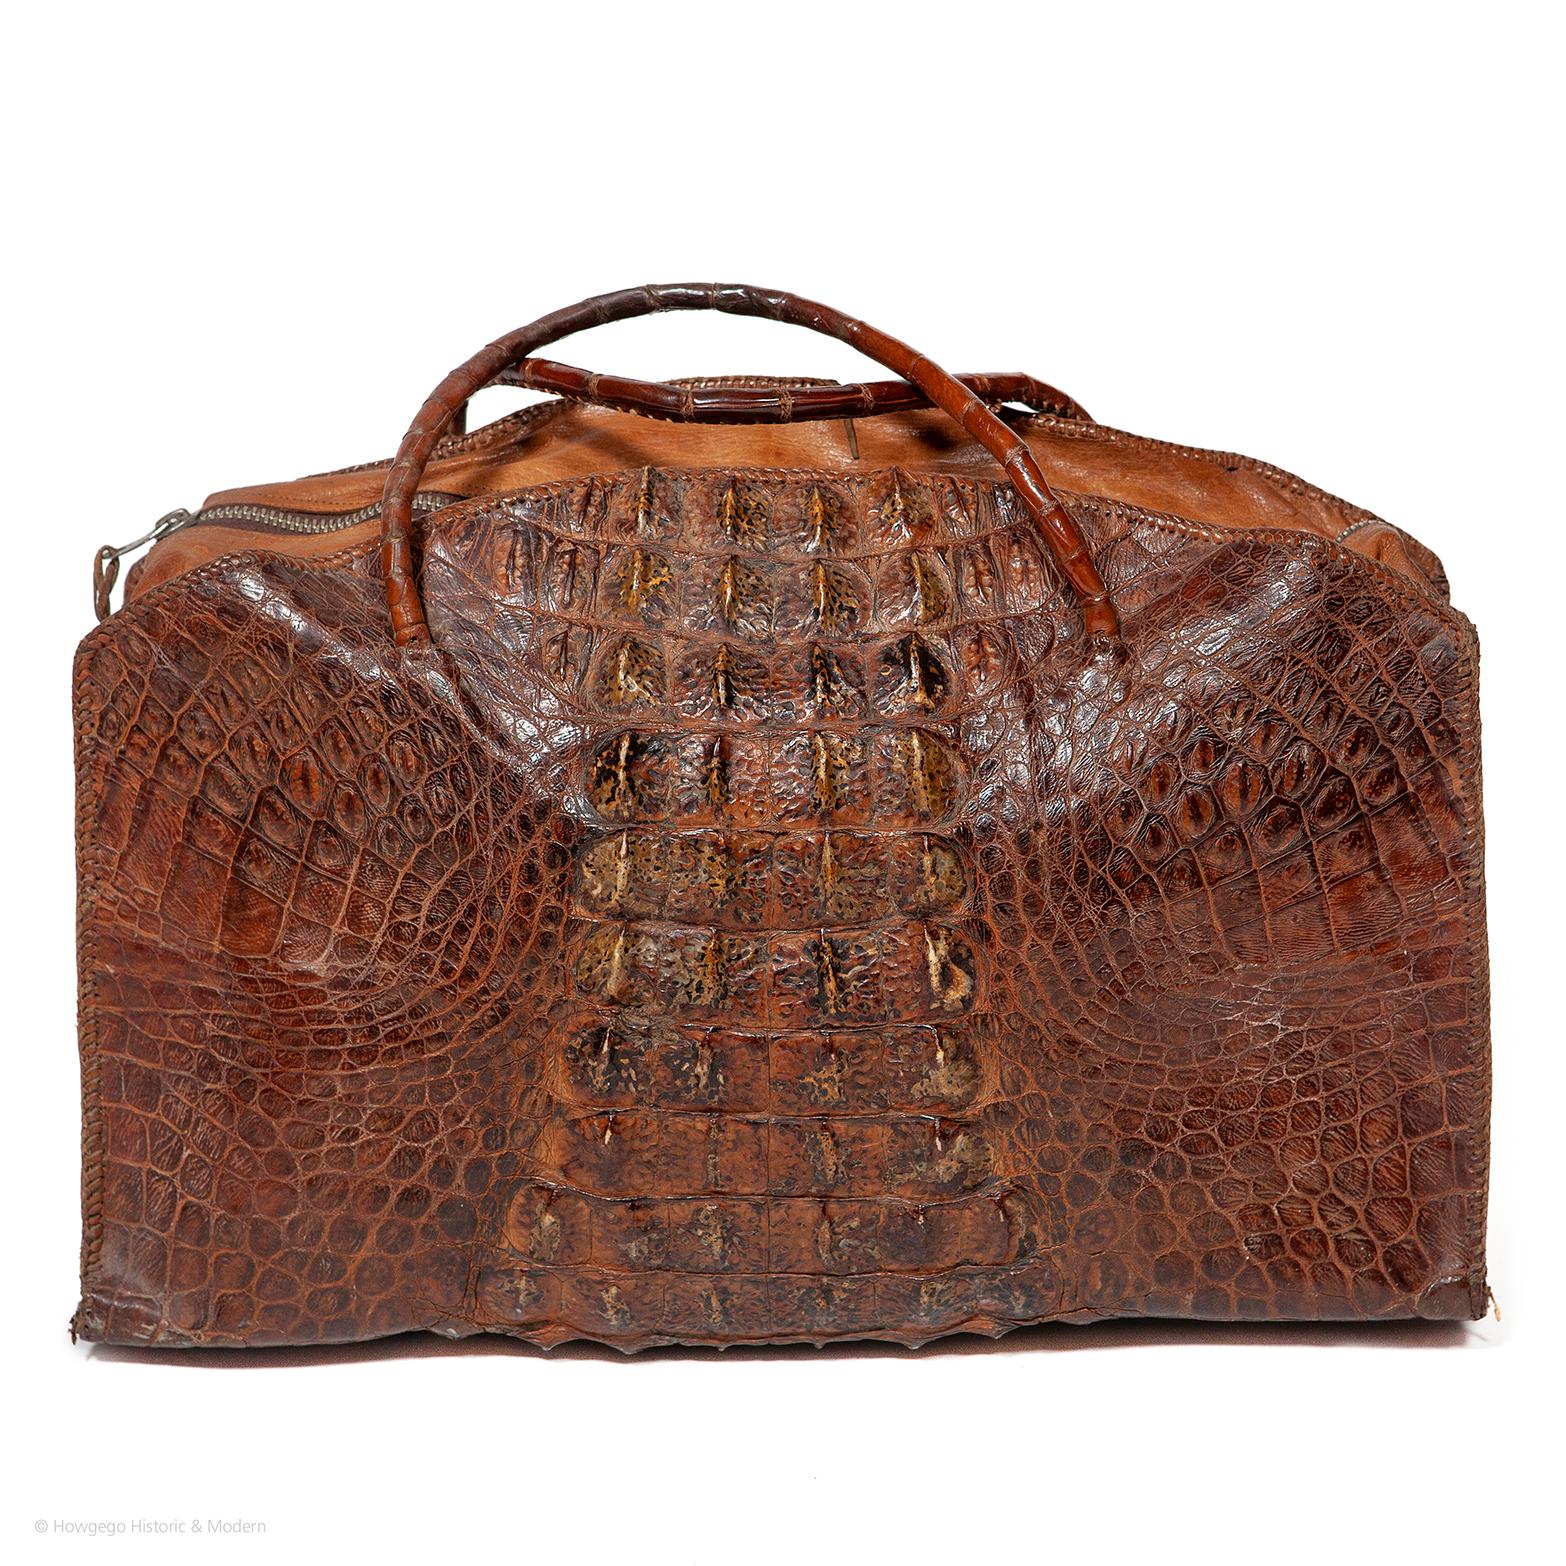 Crocodile hornback overnight bag or large handbag with exceptional, deep and richly pigmented scales. Made from one skin with complete osteoderms (back scales) wrapping from front to back with outstanding rich, colouring and depth and patterning.